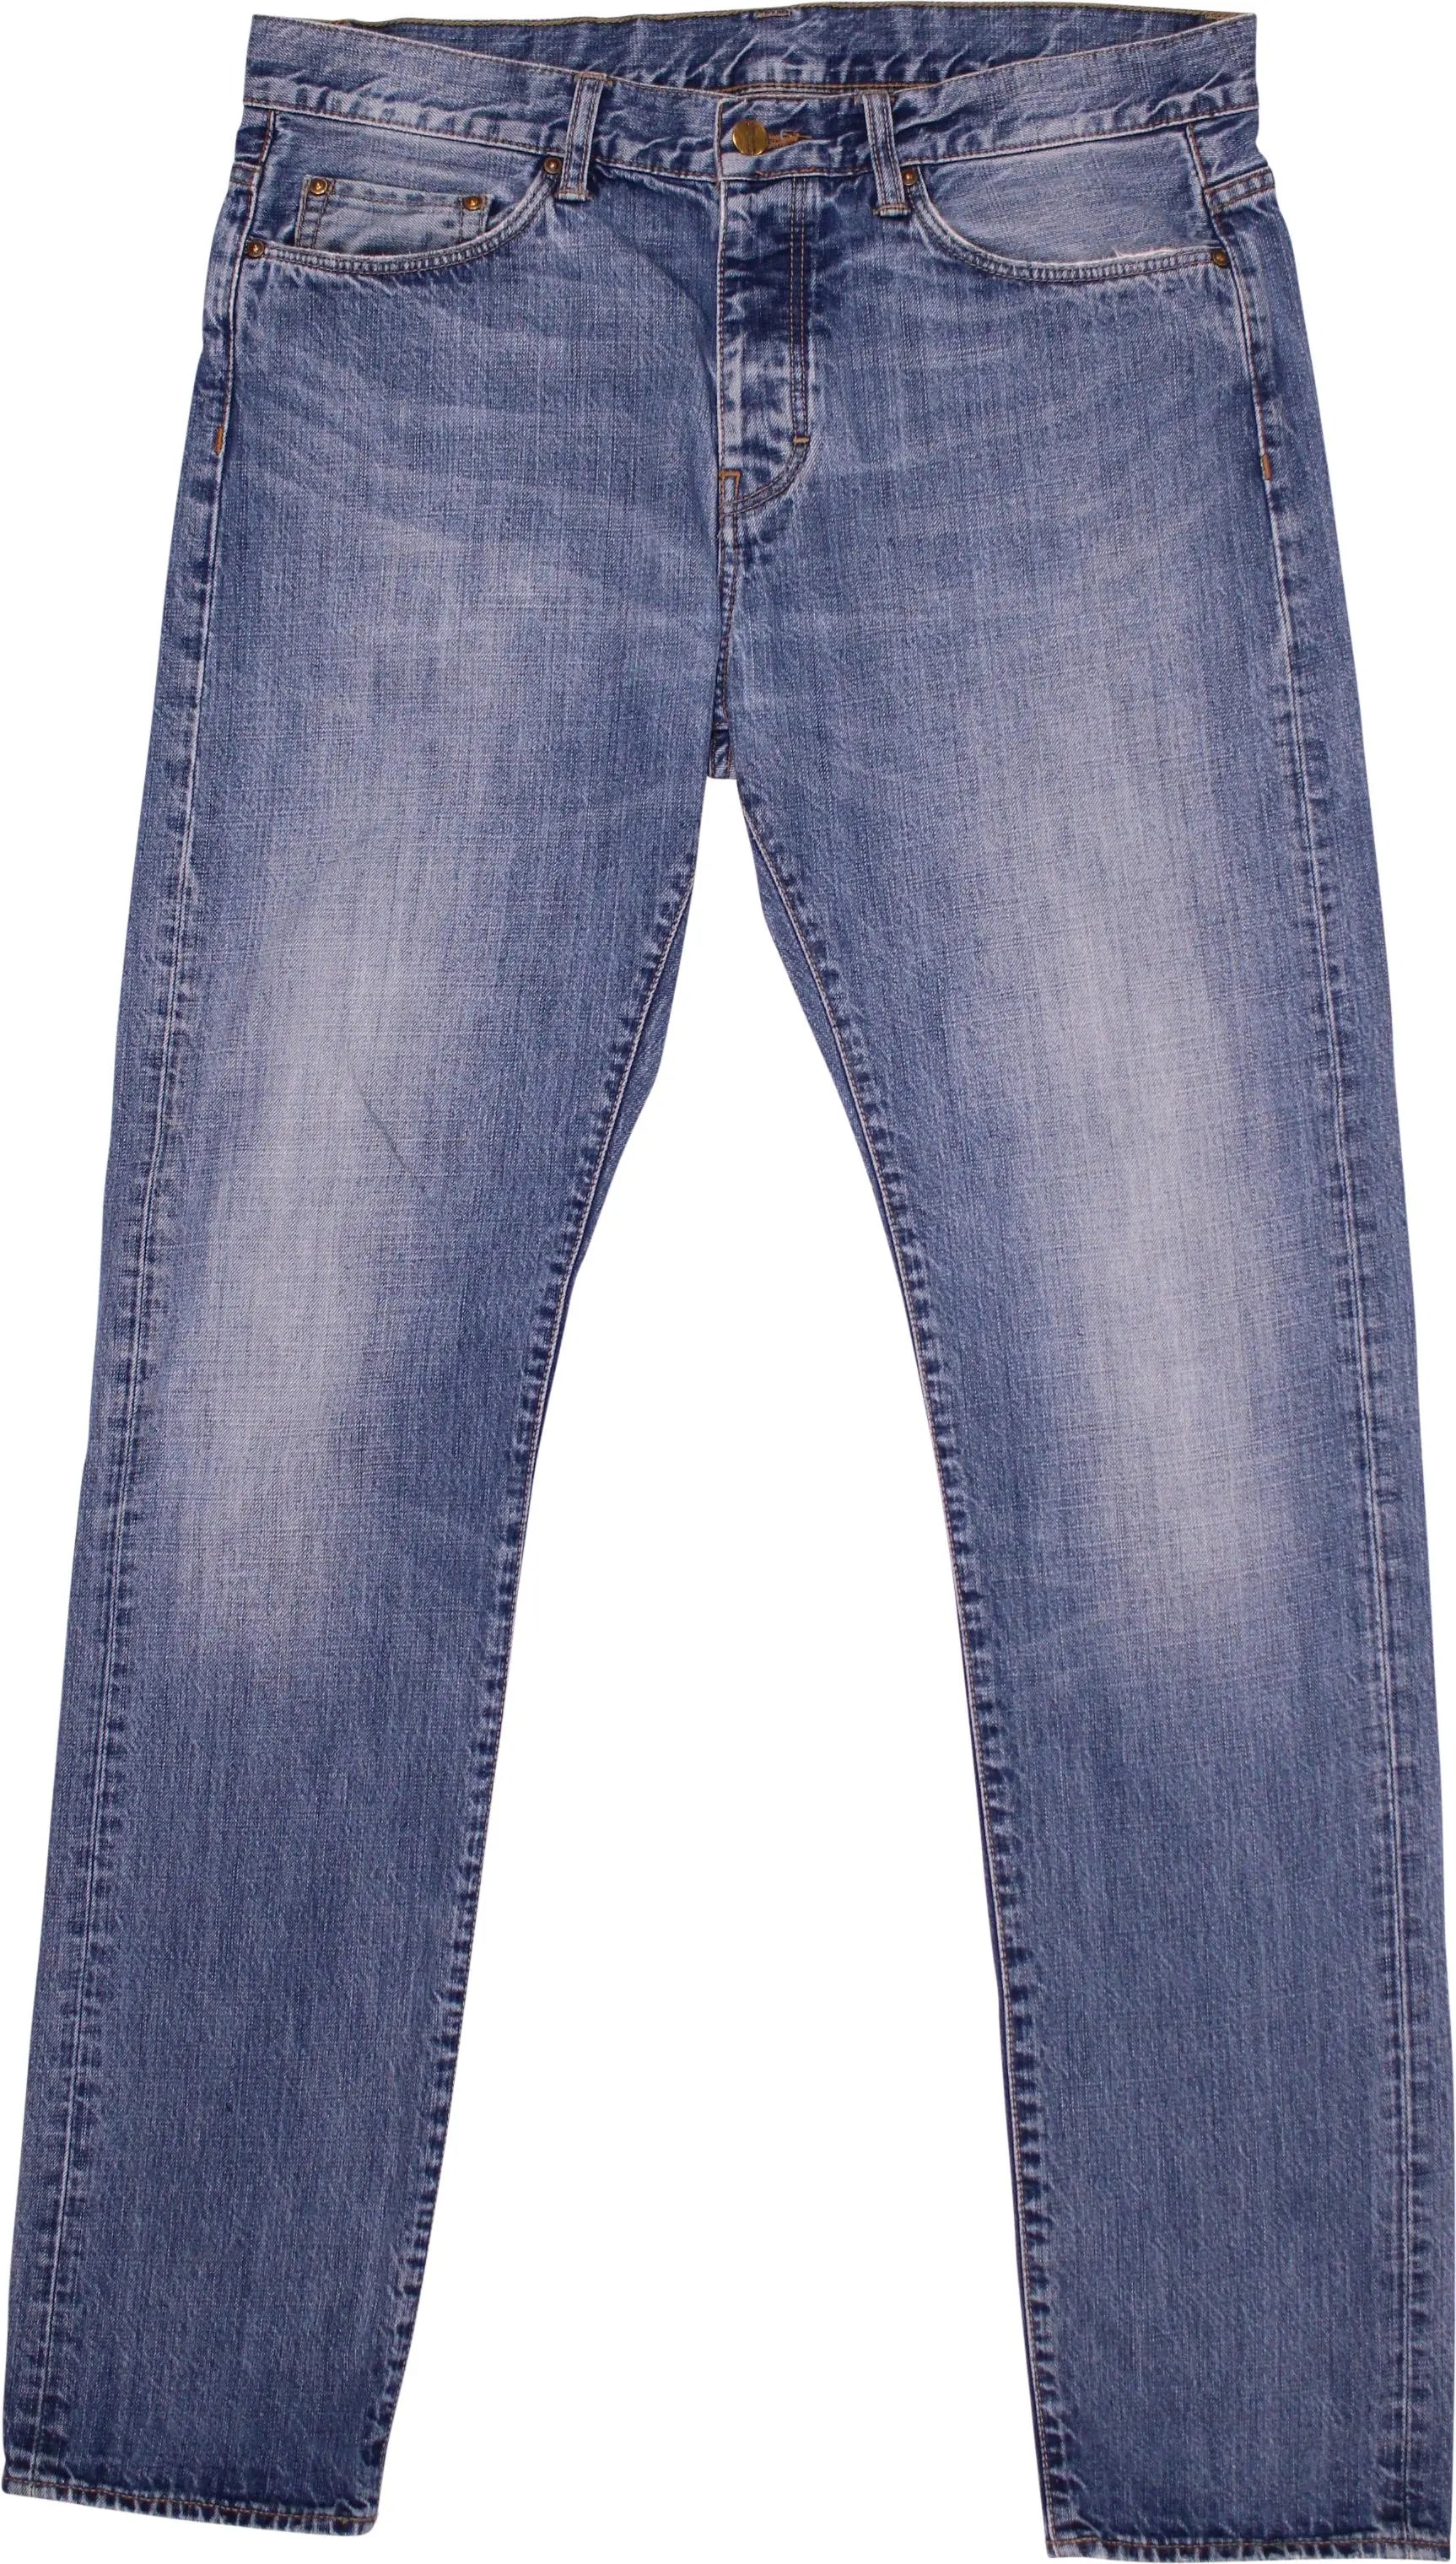 Carhartt - Blue Slim Fit Jeans by Carhartt- ThriftTale.com - Vintage and second handclothing